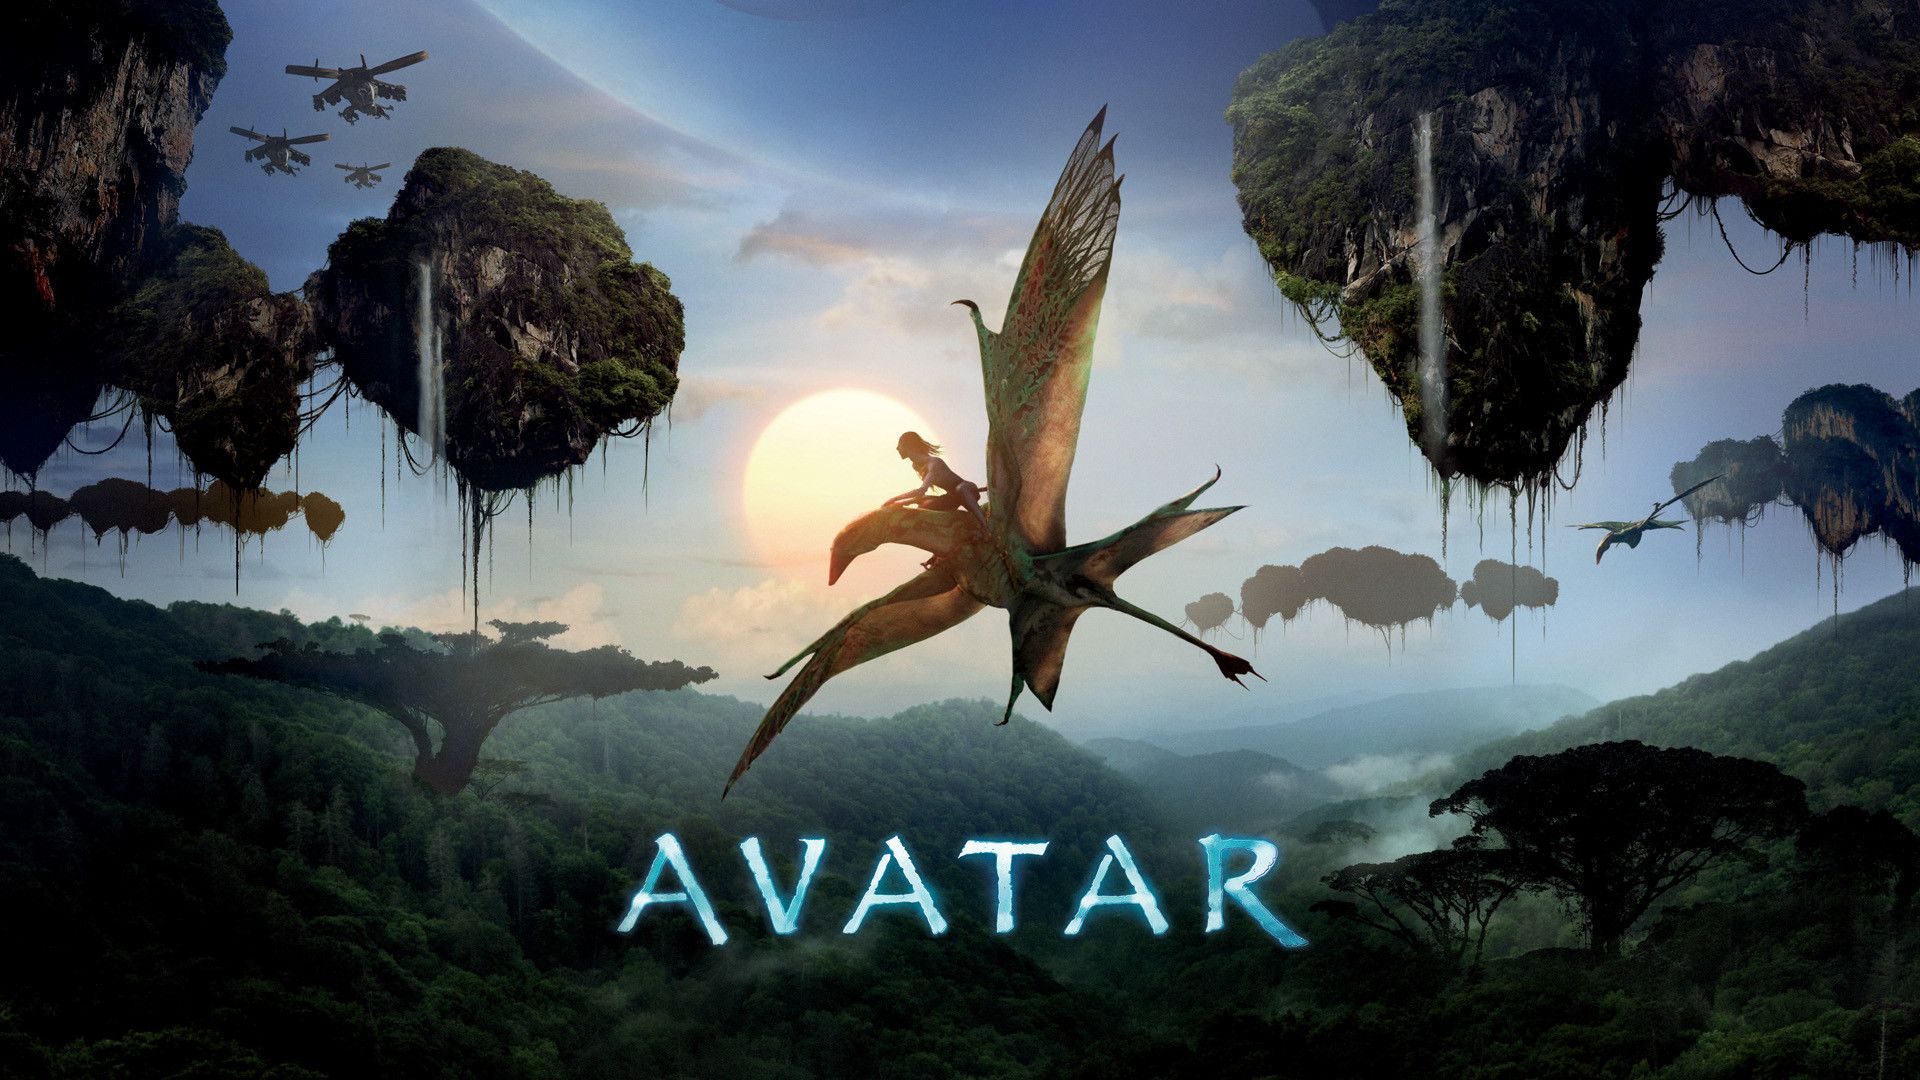 Avatar Wallpaper background picture